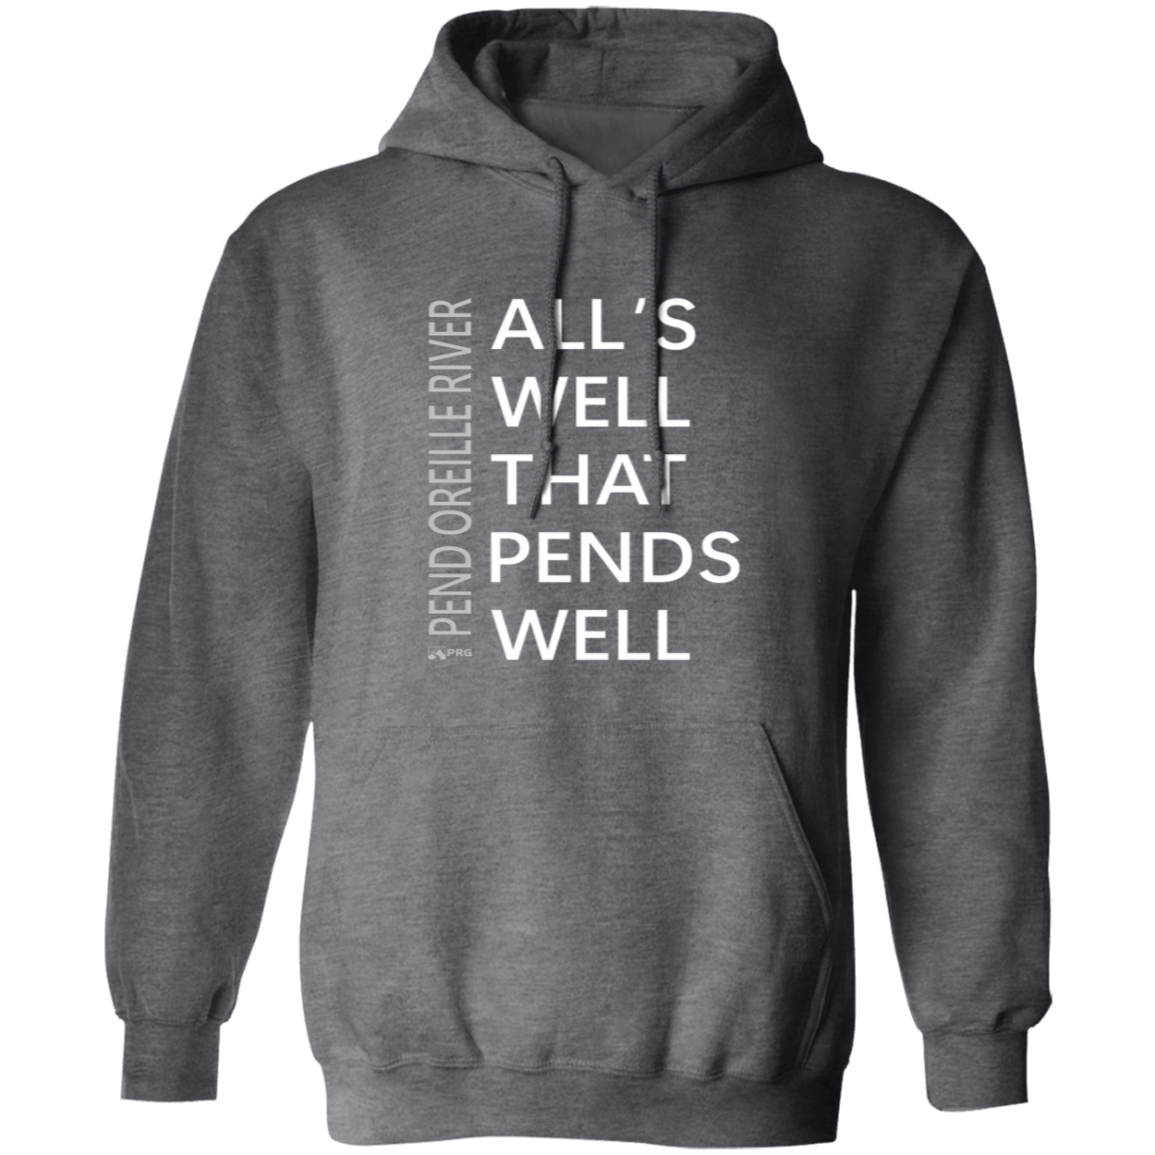 All's Well - Hoodie